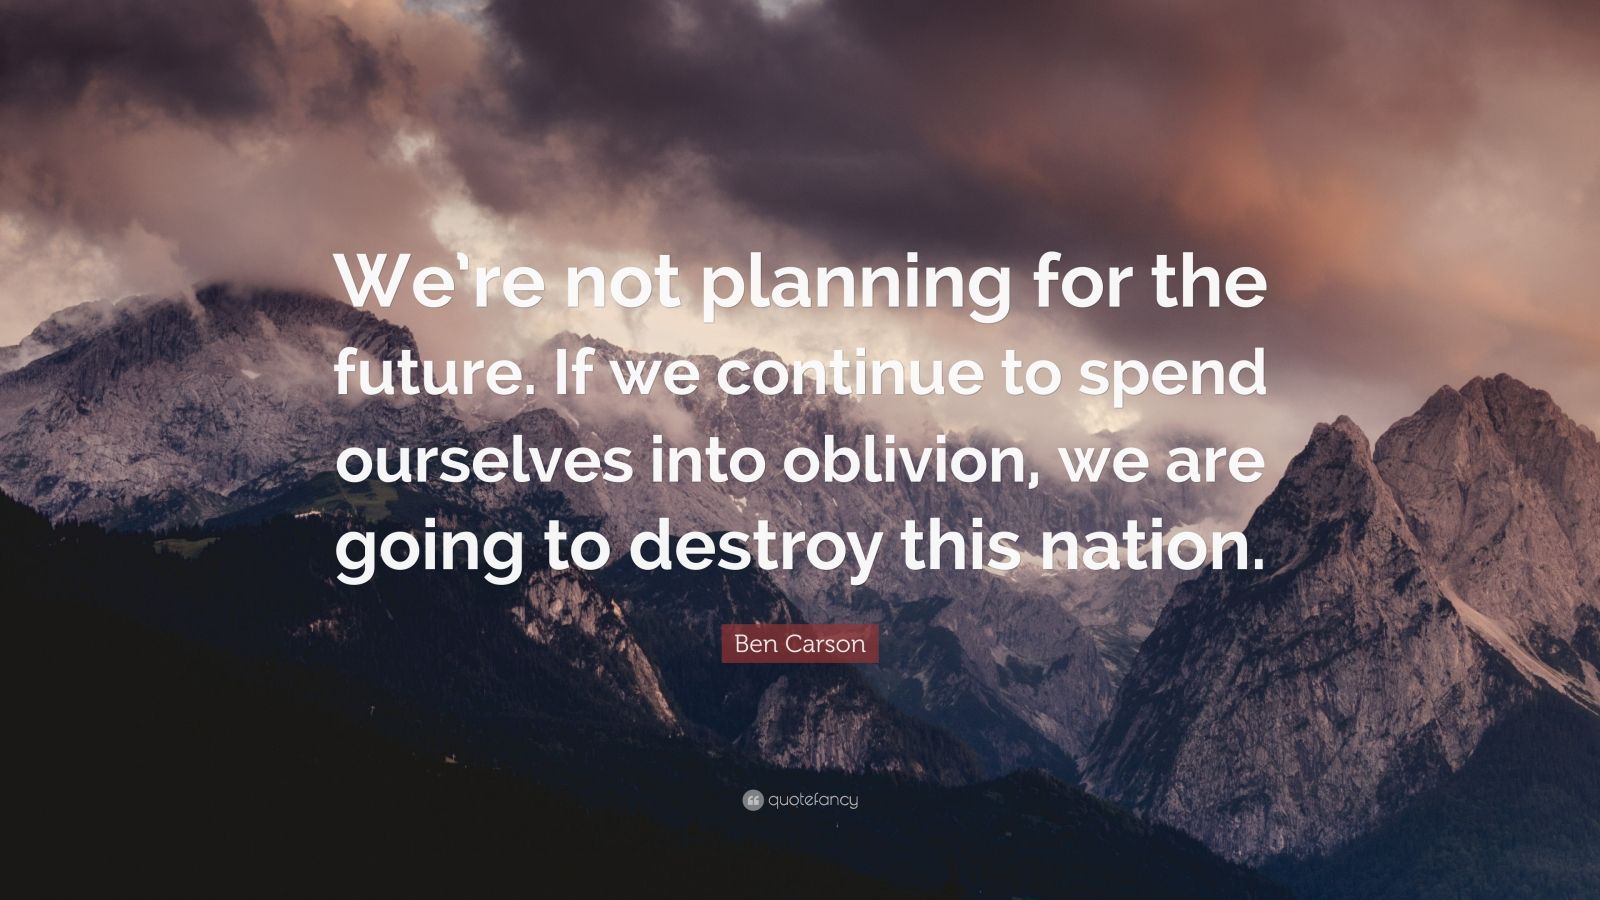 Ben Carson Quote “We’re not planning for the future. If